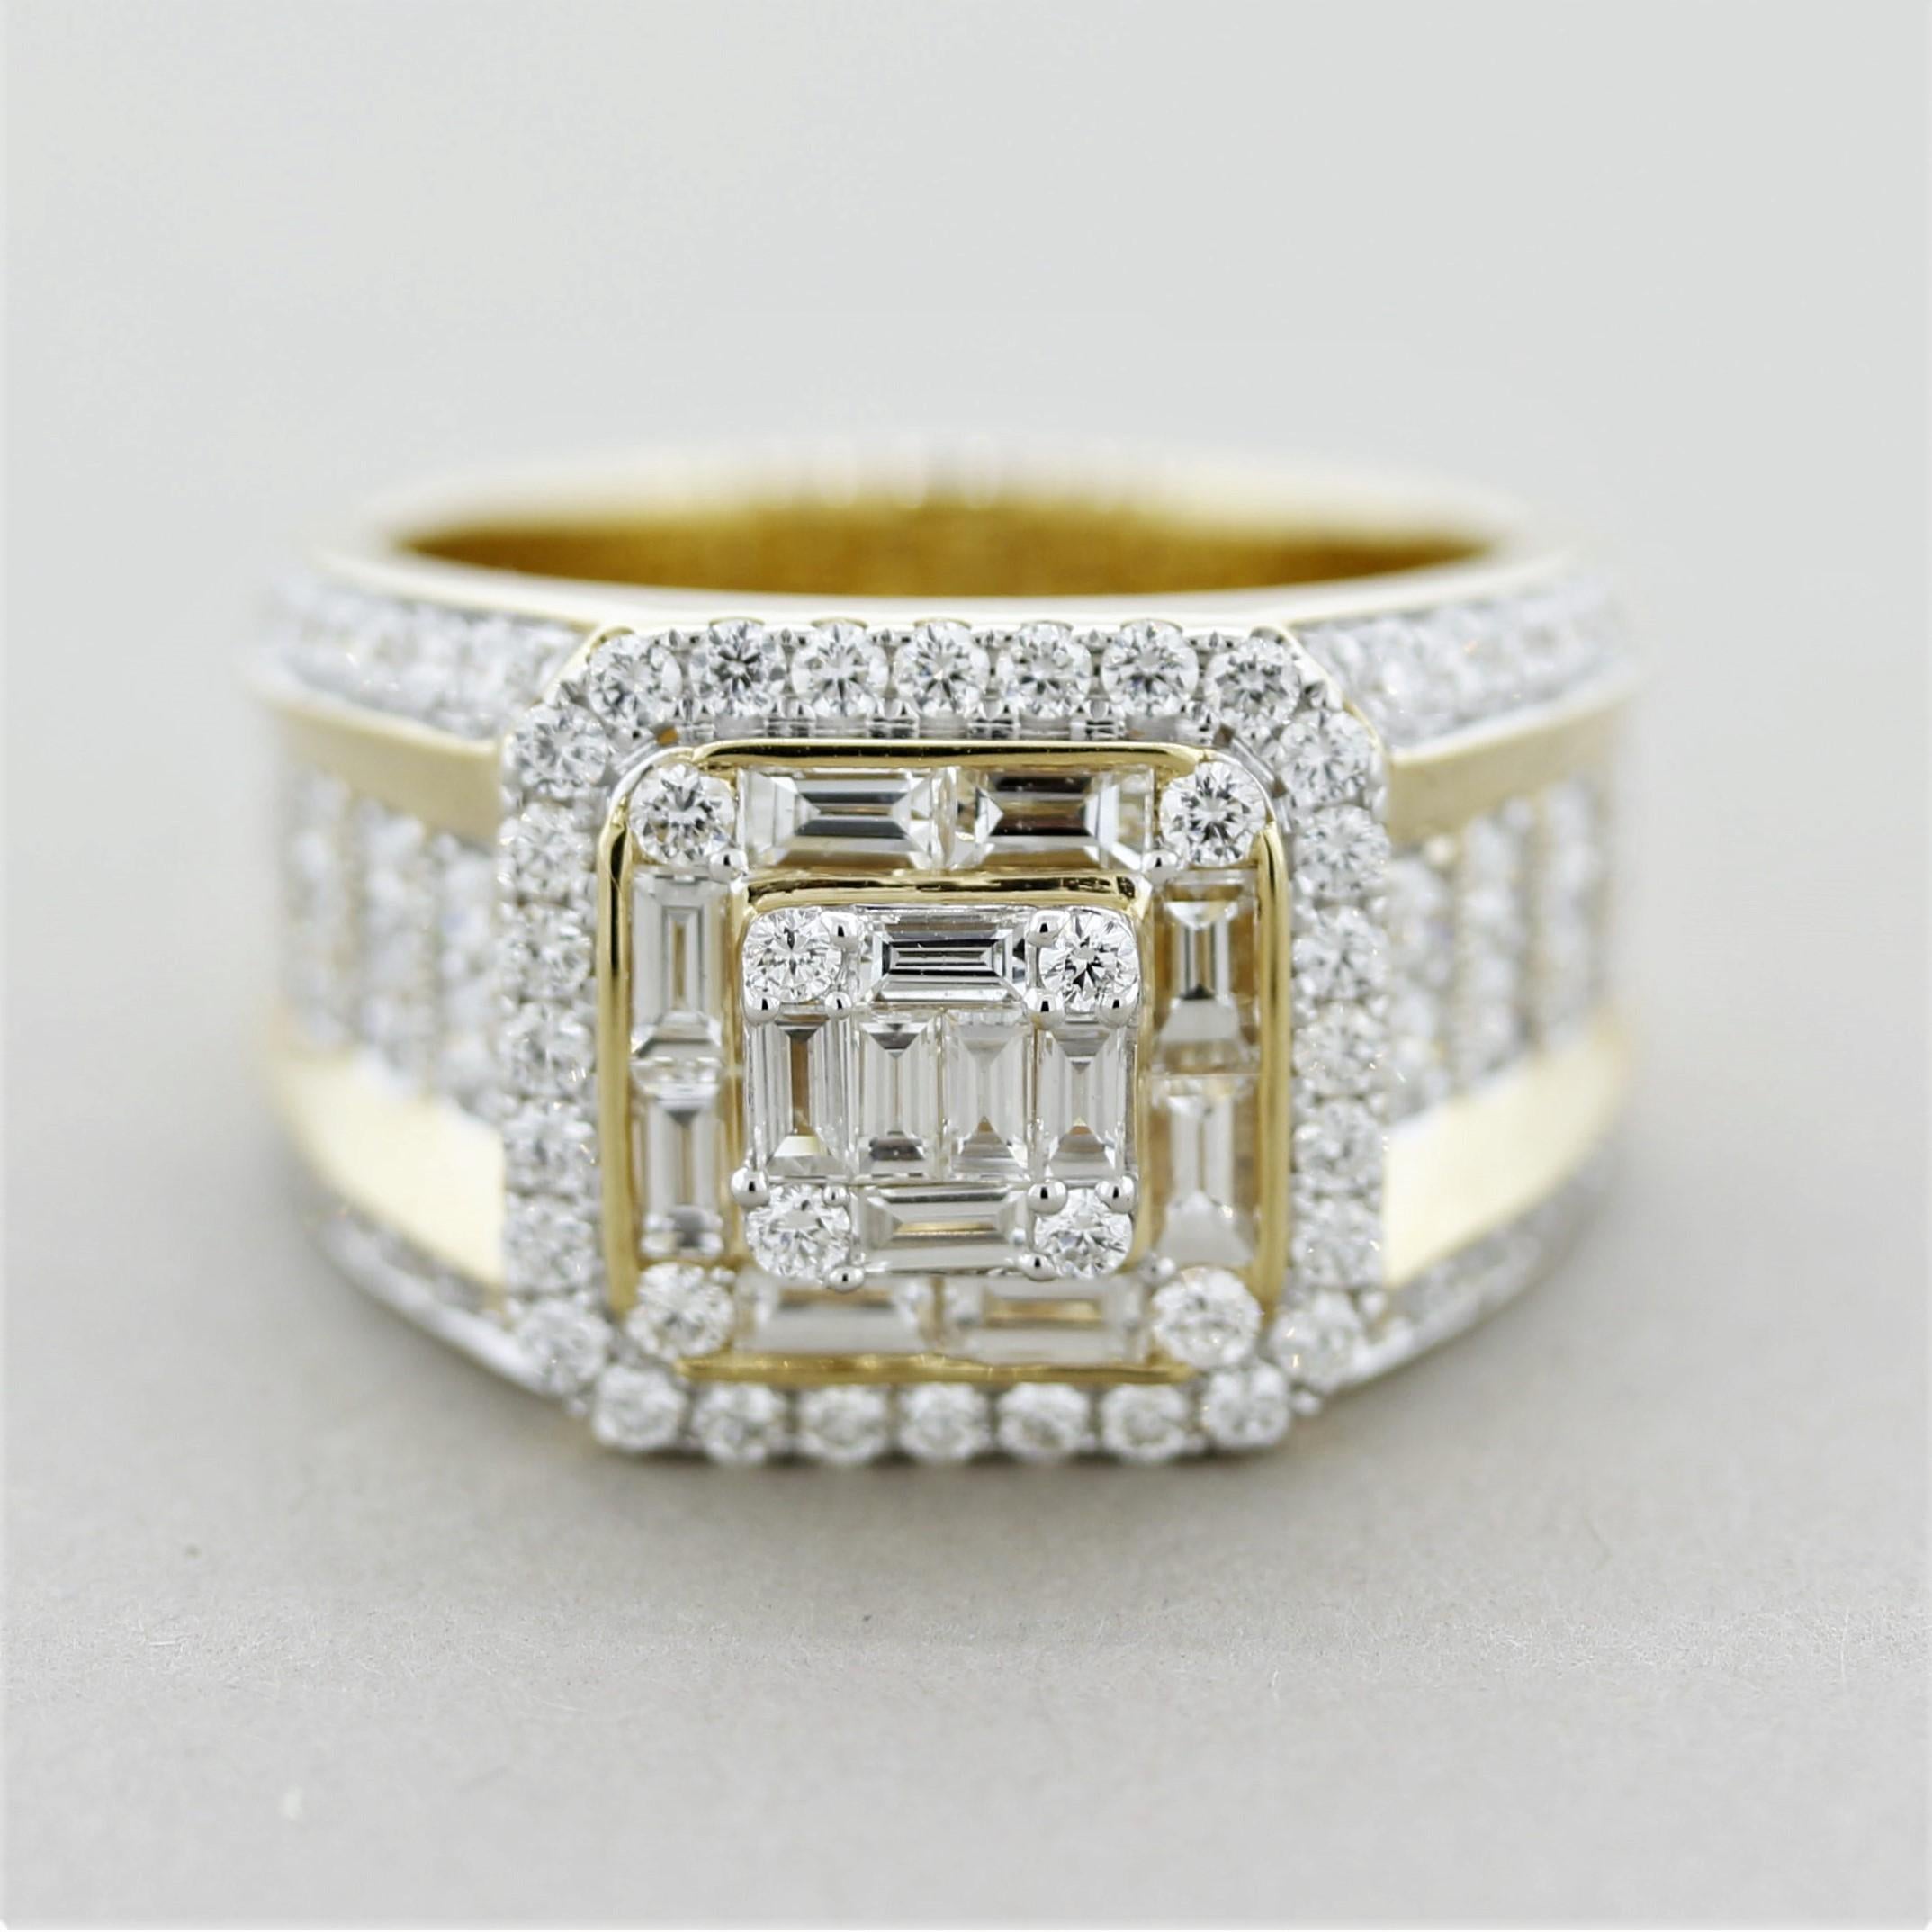 A bold ring featuring 2.65 carats of fine VS quality diamonds. They are set around the ring in a stylish pattern as well as cluster-set in the center of the ring with baguettes and round brilliant-cuts. Made in 18k yellow gold and ready to be